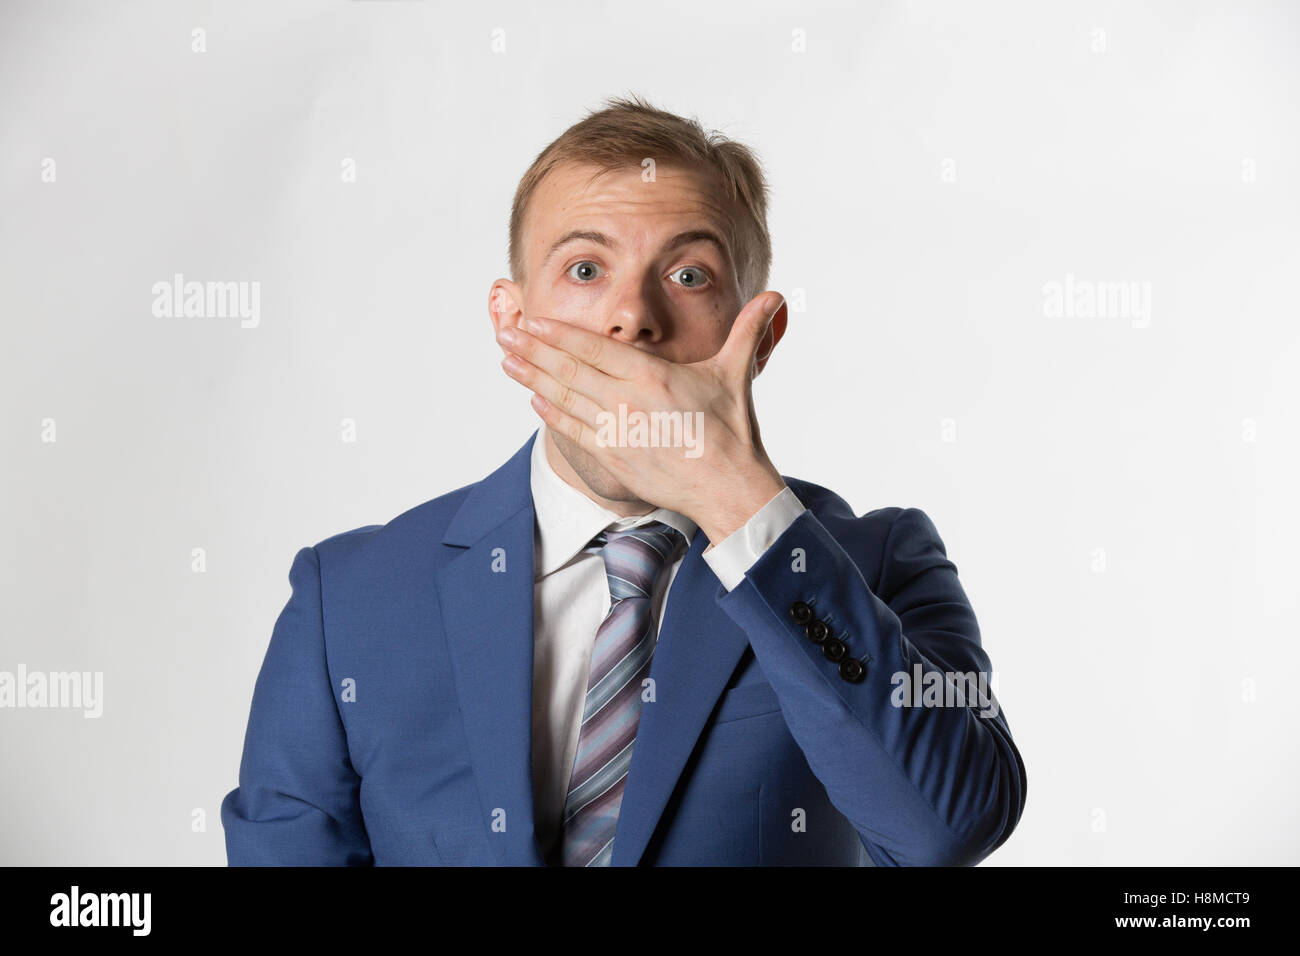 Shocked Businessman covering his mouth Stock Photo